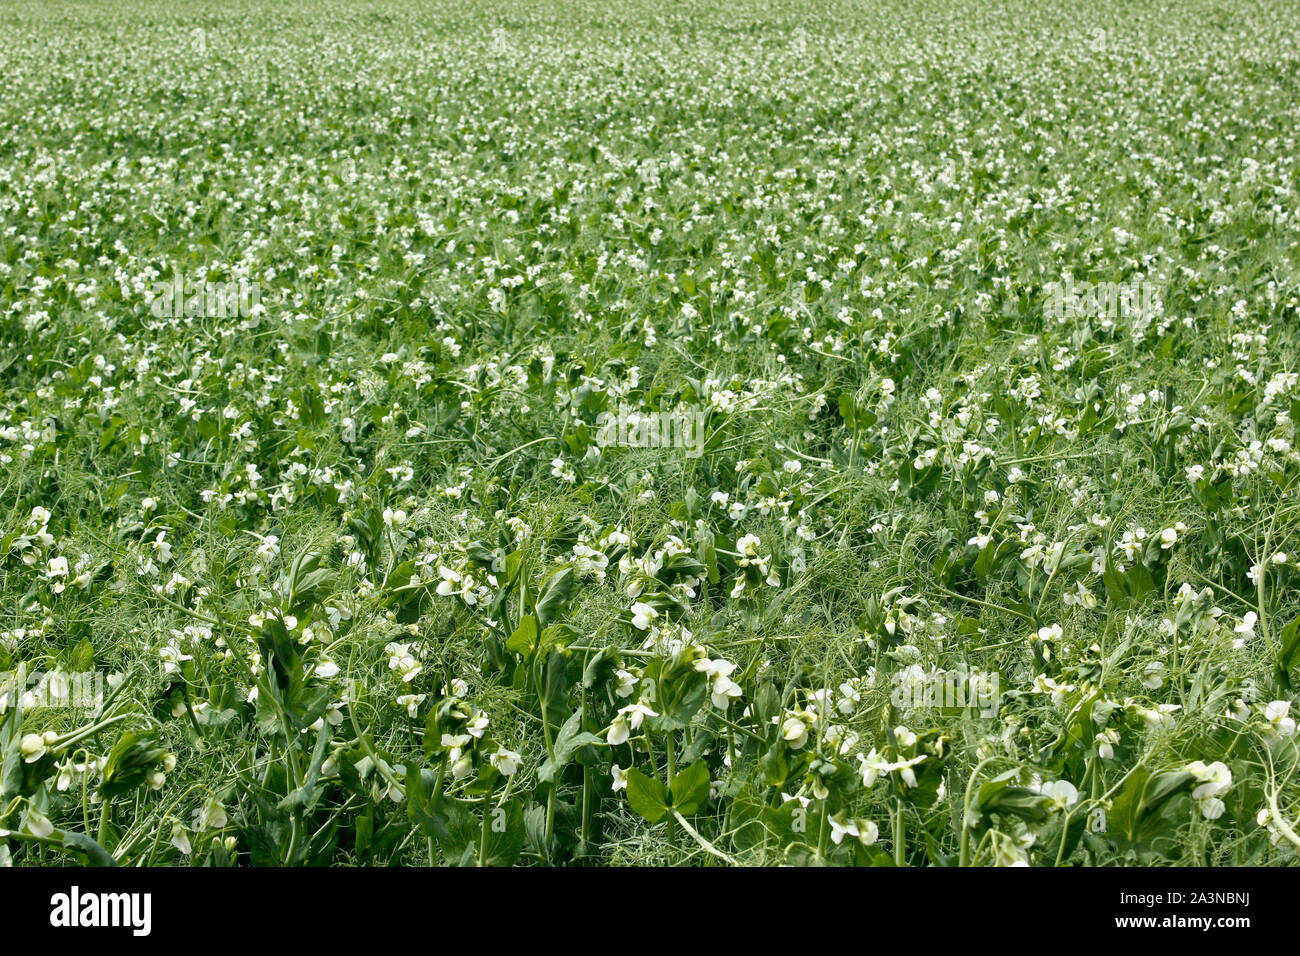 A field of Forage Peas, white flowering plants in a sea of green foliage Stock Photo